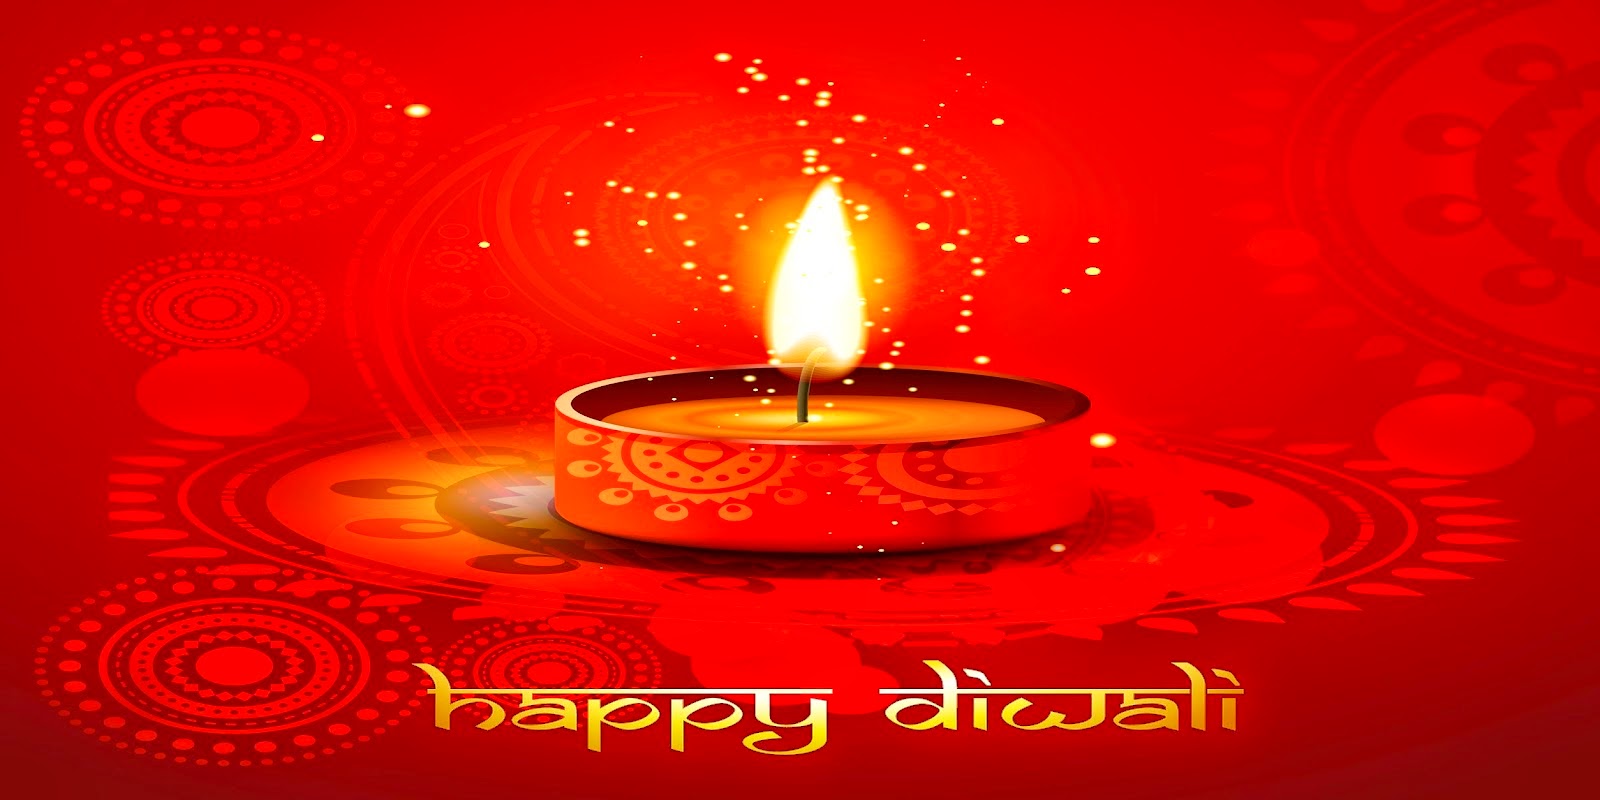 happy diwali images wallpapers,lighting,diwali,candle,holiday